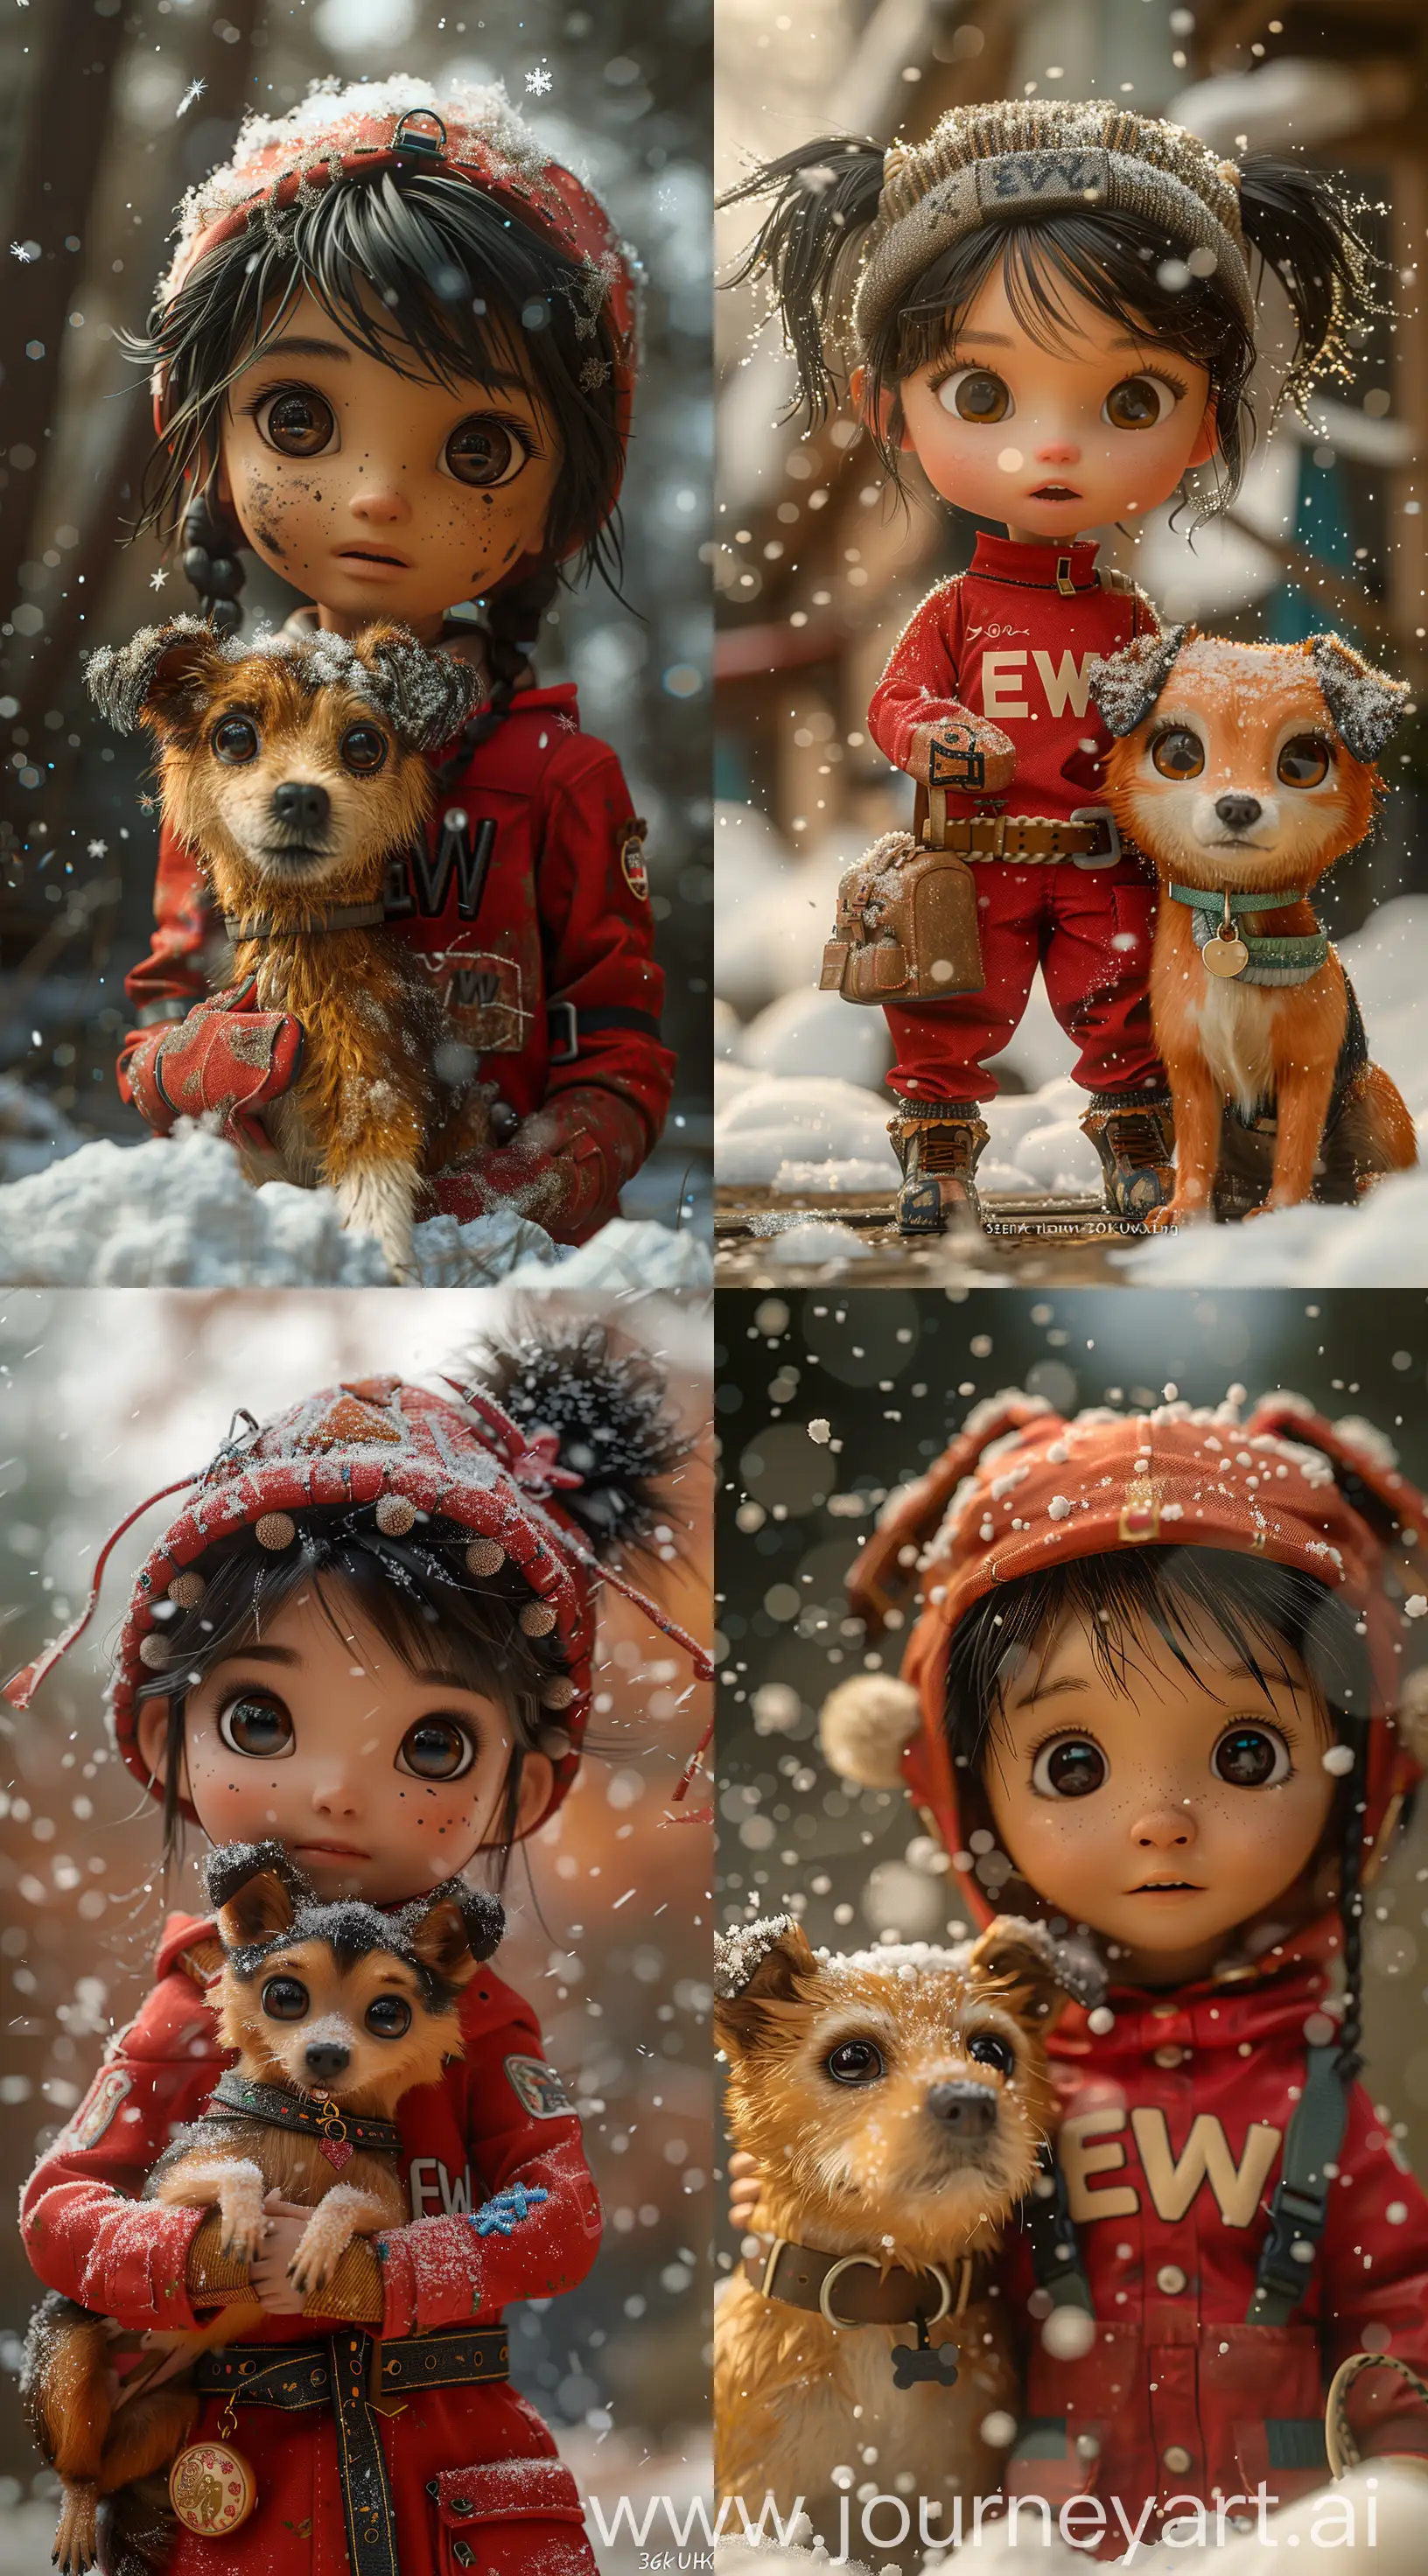 Charming-Girl-in-Red-Outfit-with-Dog-in-Snowy-Photorealistic-Scene